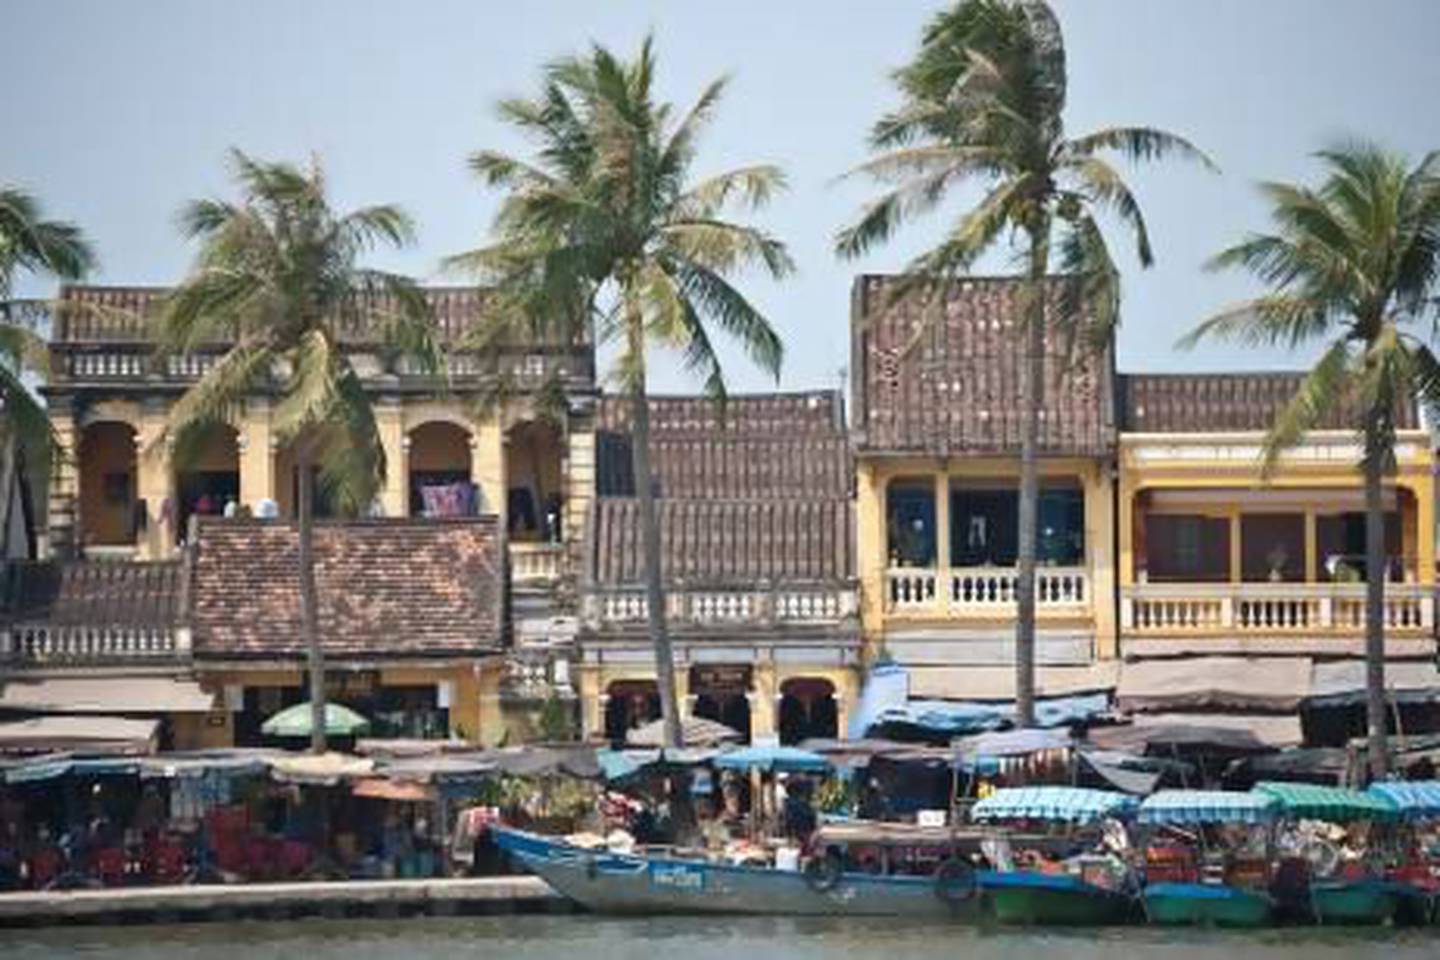 Shop houses along the riverfront in Hoi An, a Unesco World Heritage Site in Vietnam. Getty Images / Lonely Planet Images